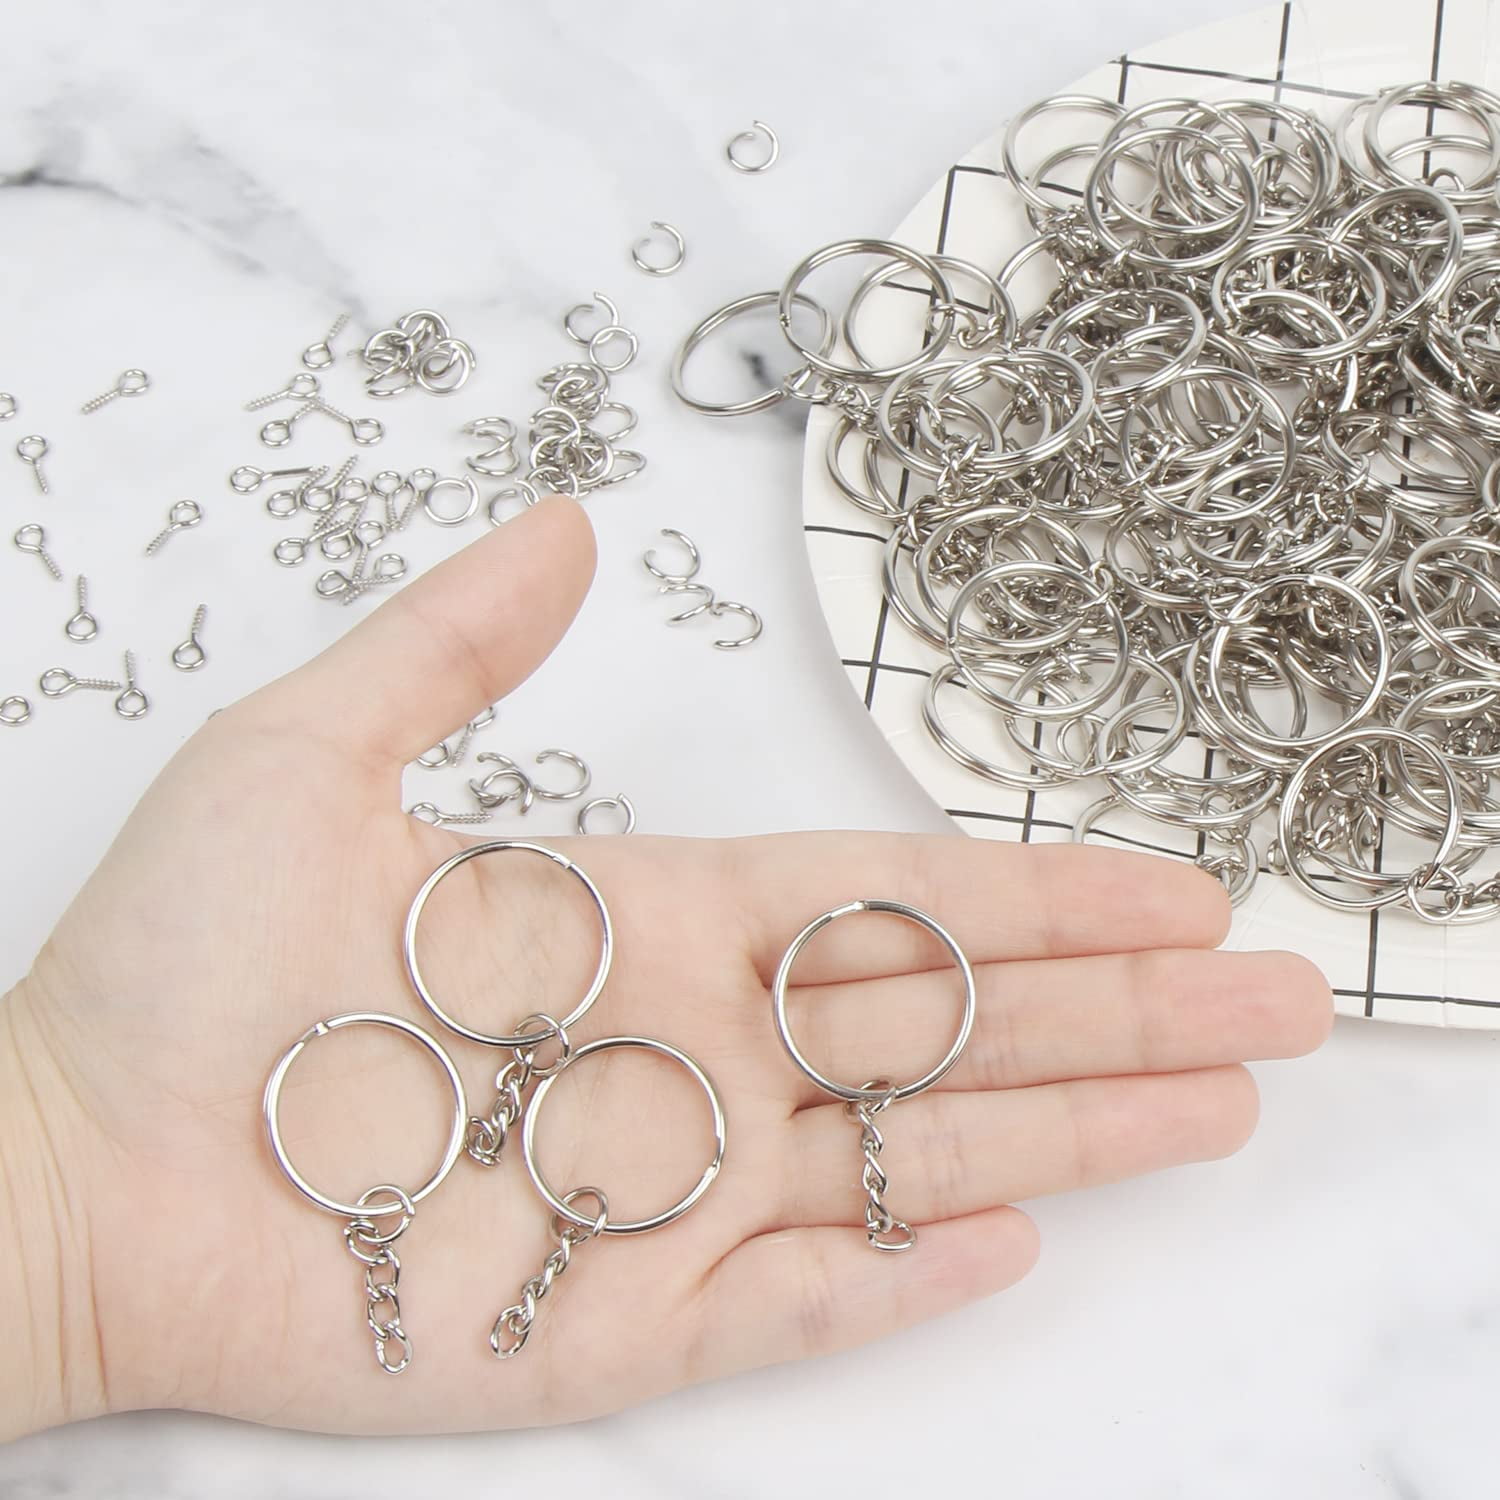 Swpeet 300Pcs Key Chain Rings Kit, 100Pcs Keychain Rings with Chain and  100Pcs Jump Ring with 100Pcs…See more Swpeet 300Pcs Key Chain Rings Kit